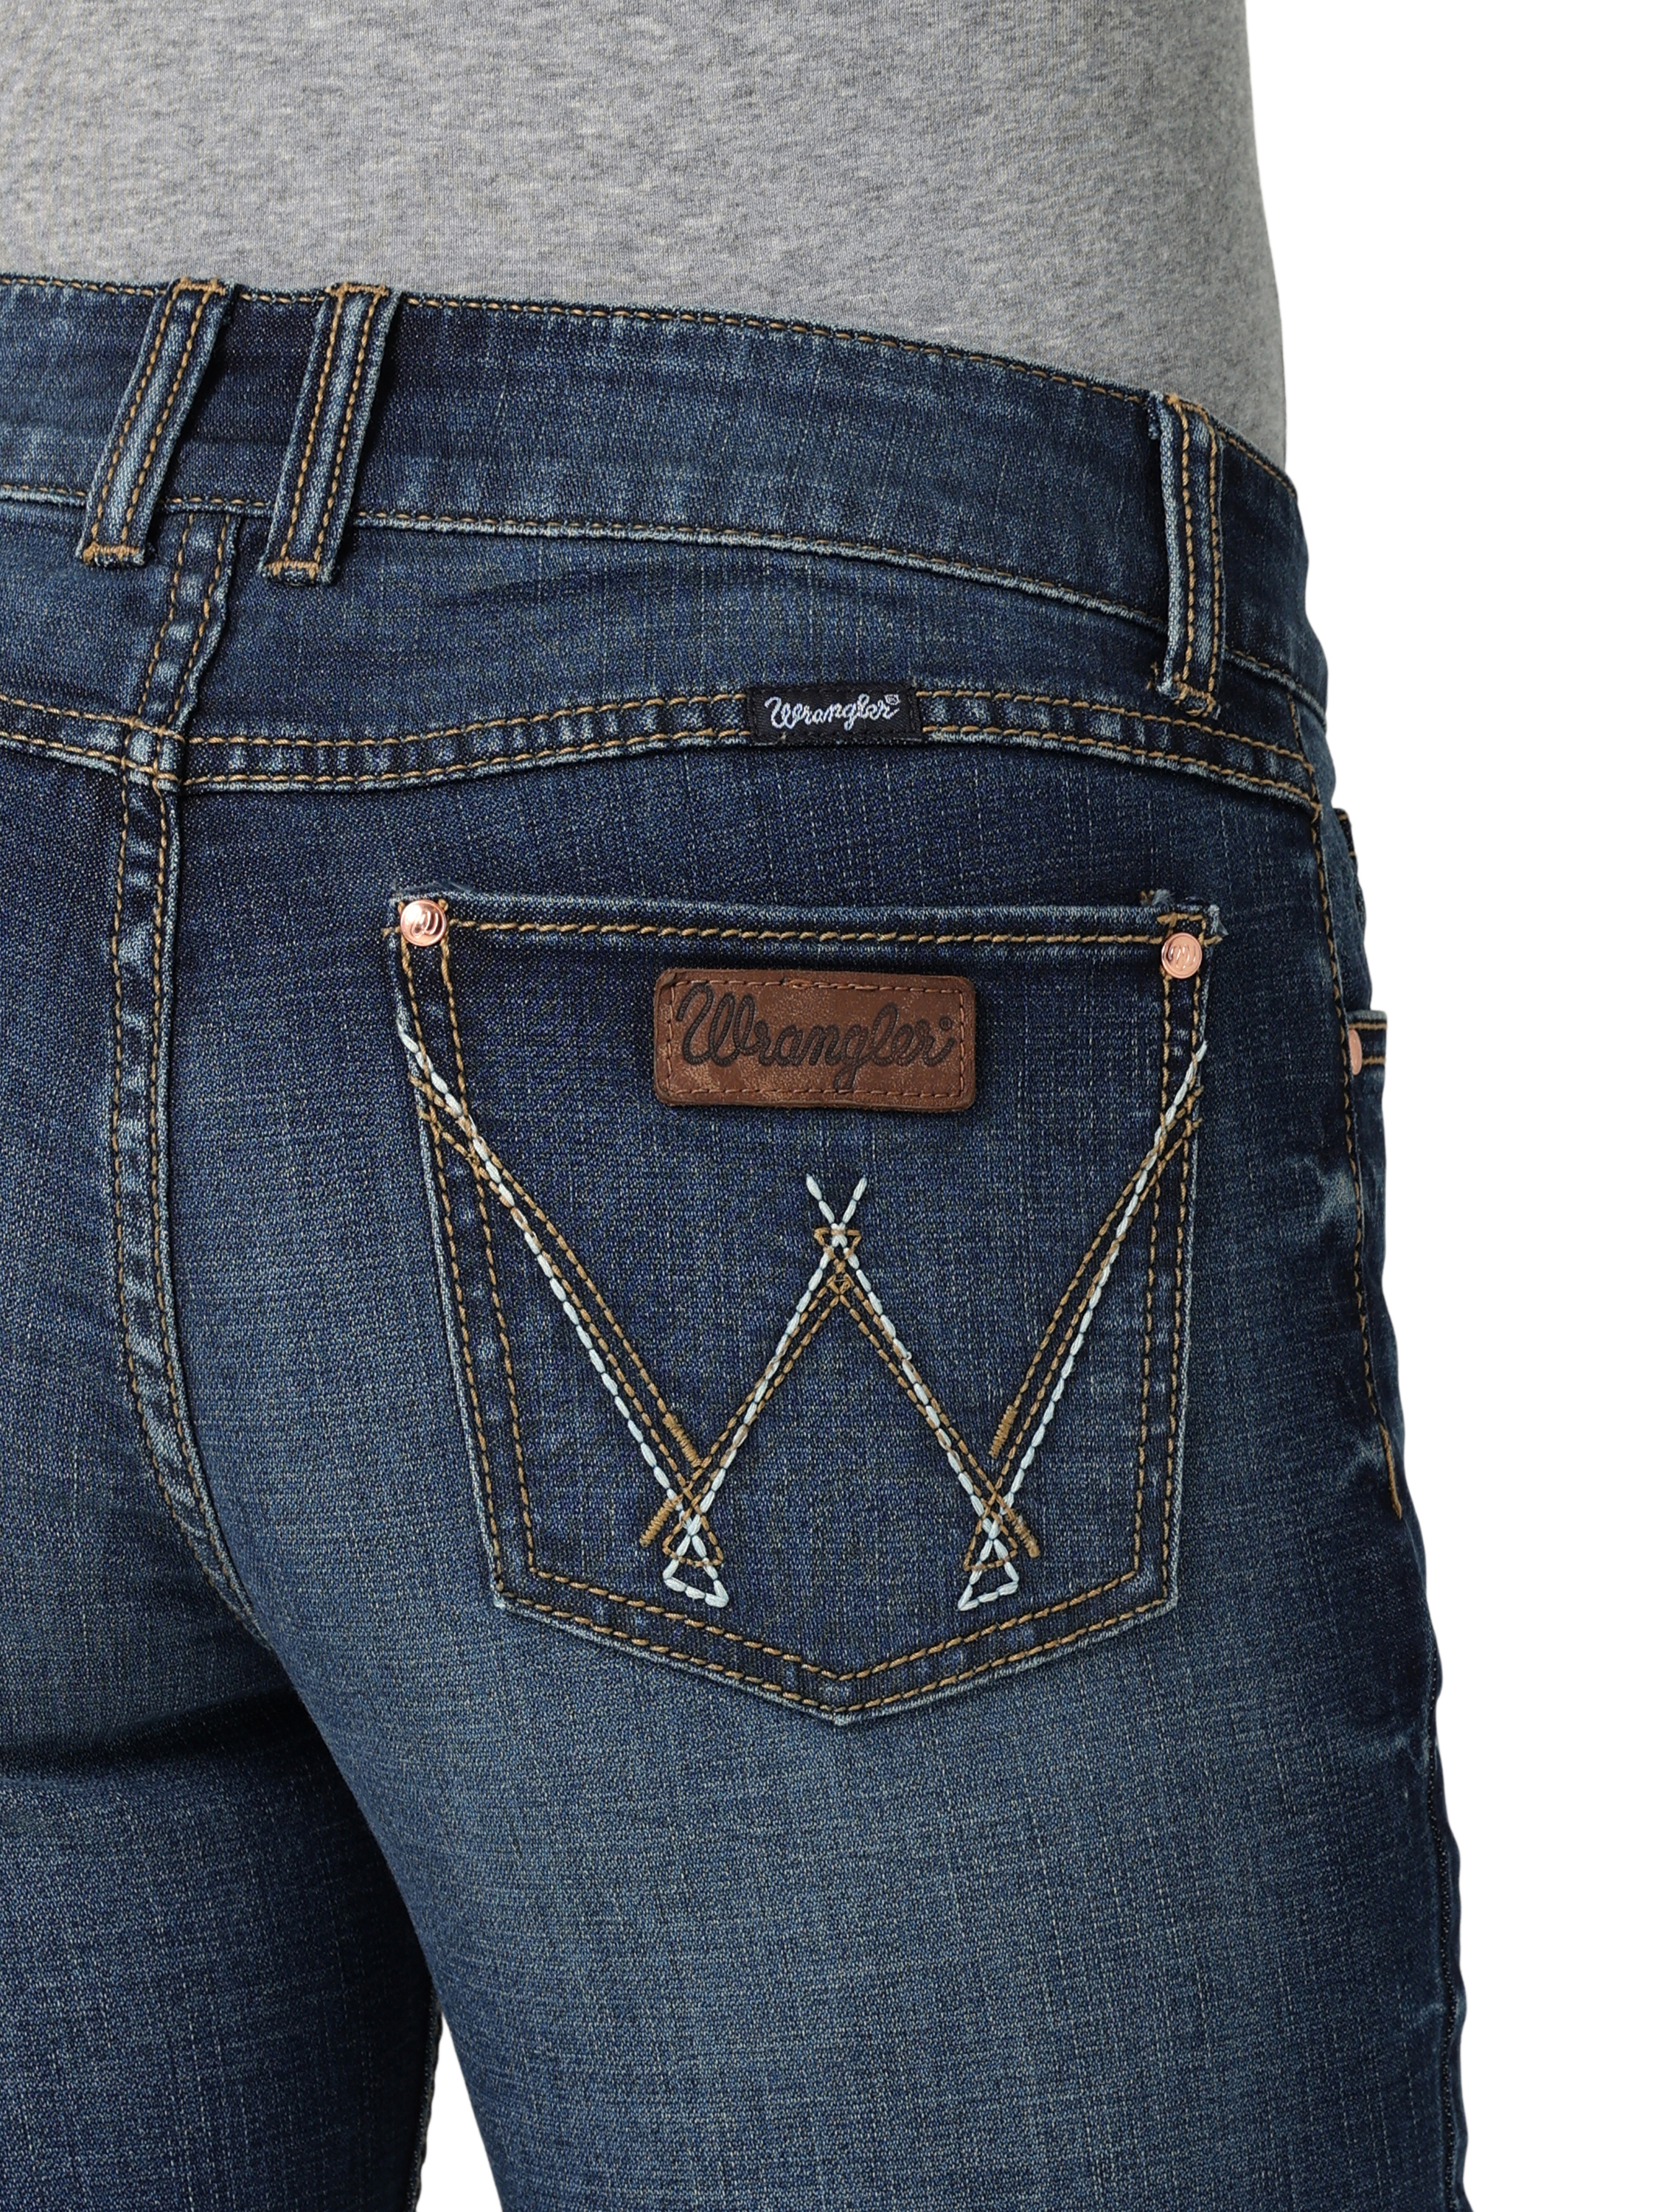 Wrangler® Women's Retro Mae Bootcut Jean with Stretch Fabric - image 5 of 6